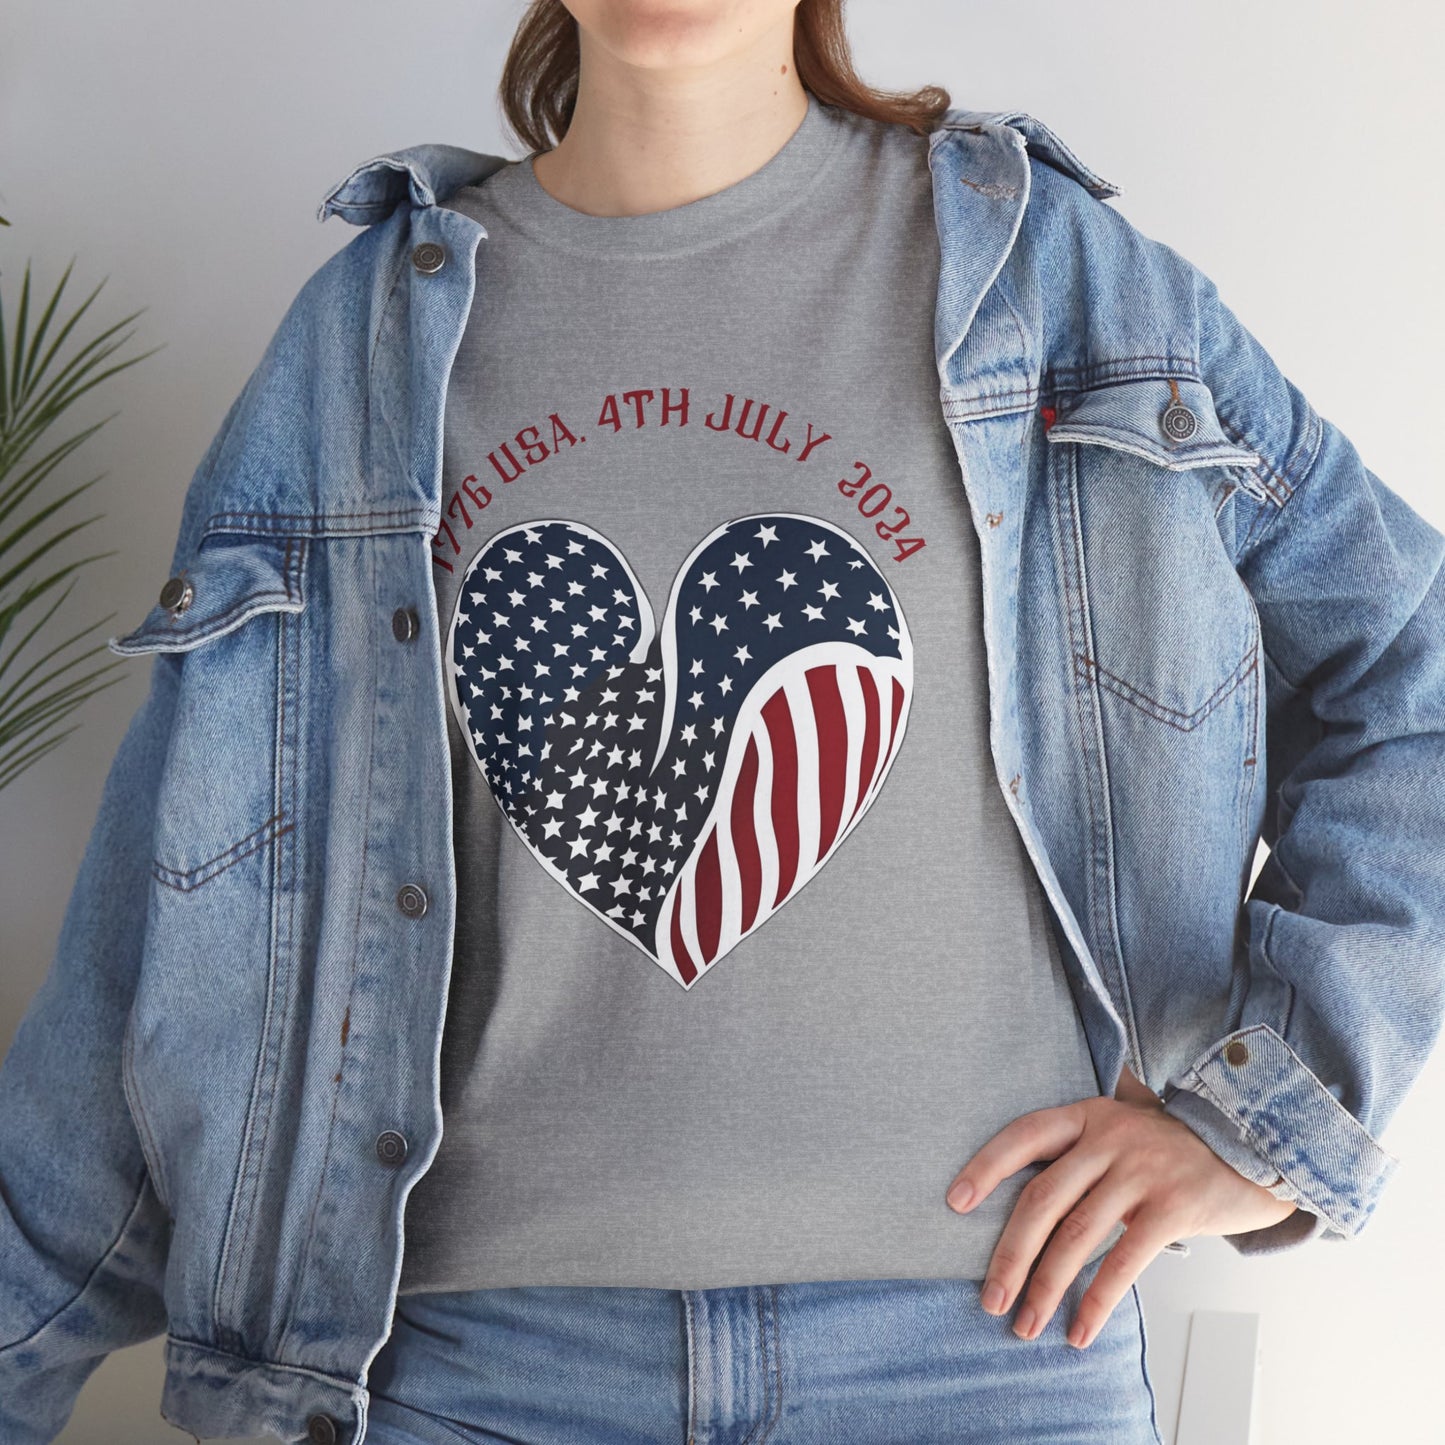 Unisex short sleeve t-shirt, Patriotic for the 4th of July